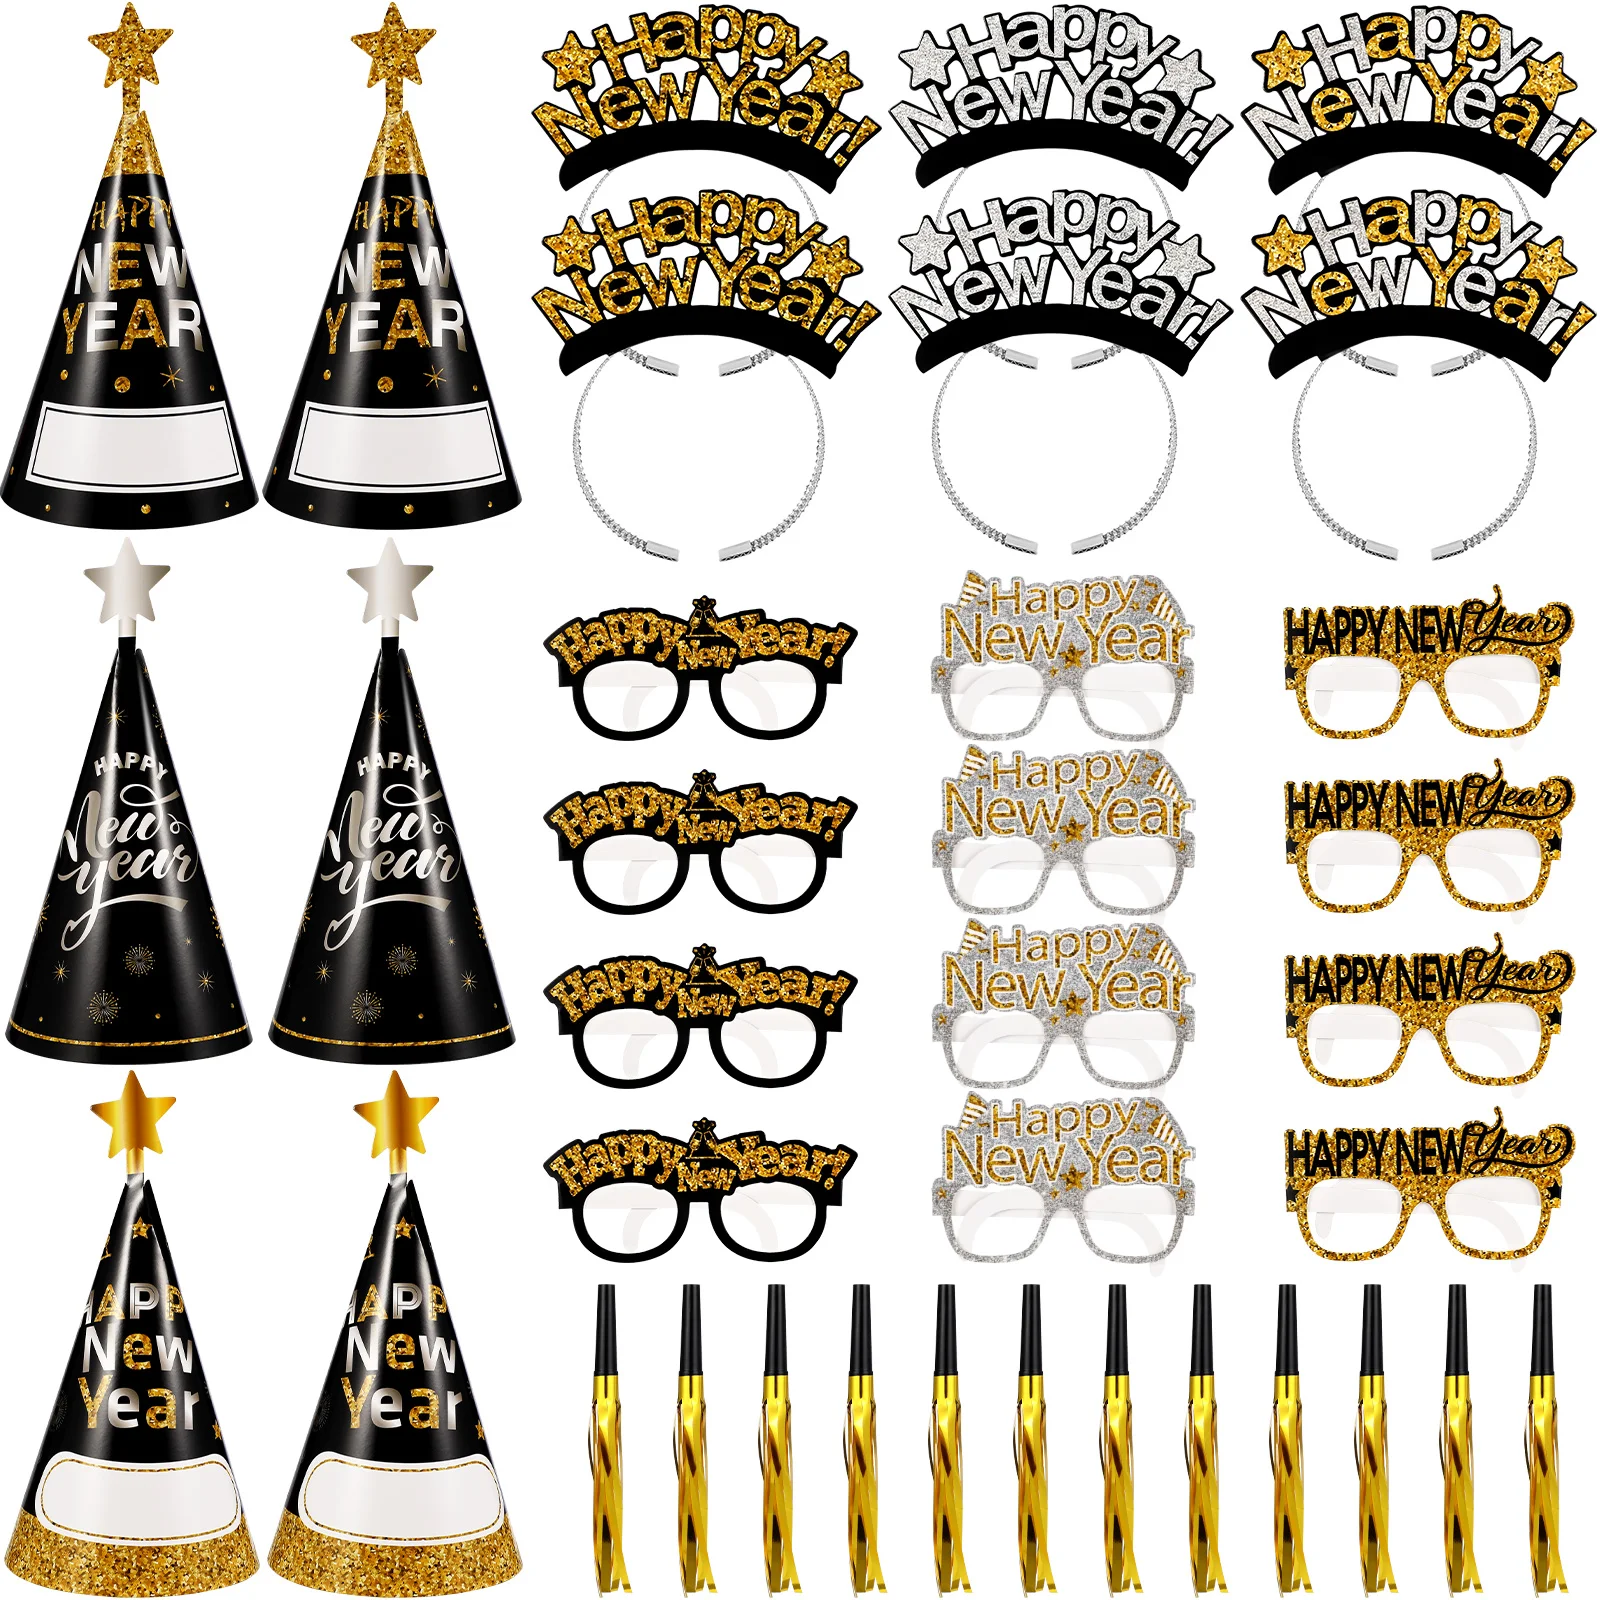 

New Year Party Set Top Hat Bling Decor Wedding Dress Kit Years Paper Happy Supplies Eve Kits Photo Props